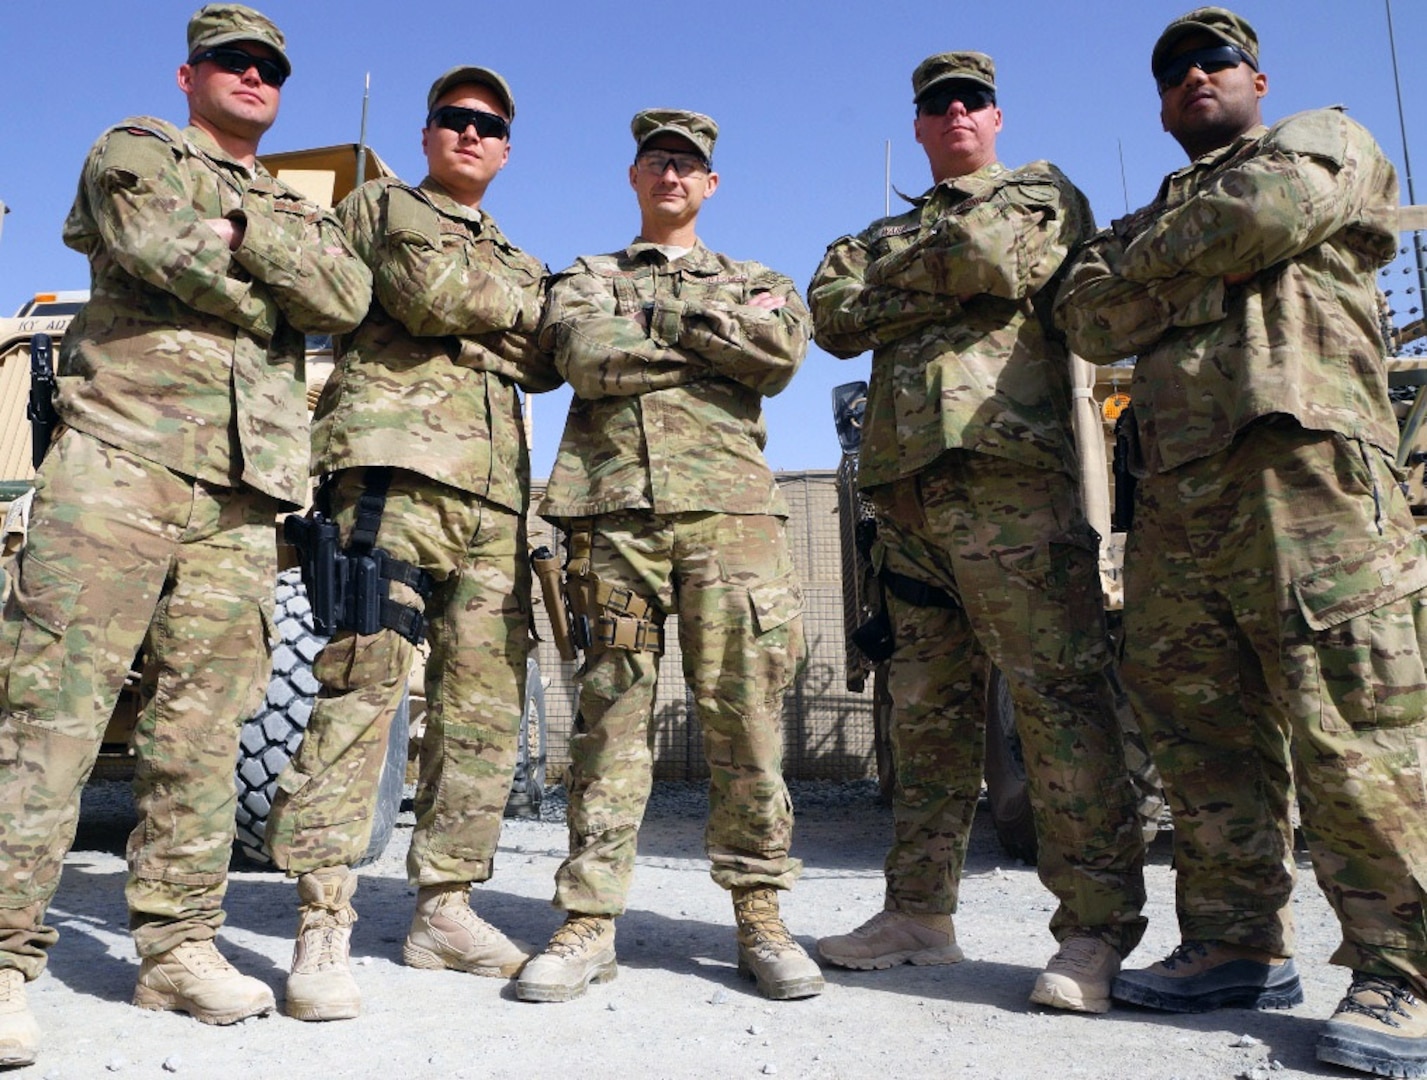 Air Force Staff Sgt. Jonathon Stribling, second from left, with the Airmen of the Kentucky National Guard’s Agribusiness Development Team 4 in southern Afghanistan on March 6, 2012. Also pictured are Staff Sgt. Austin McDonald, Tech. Sgt. Bucky Harris, Staff Sgt. Jeff Ward and Staff Sgt. Raphael Williams.